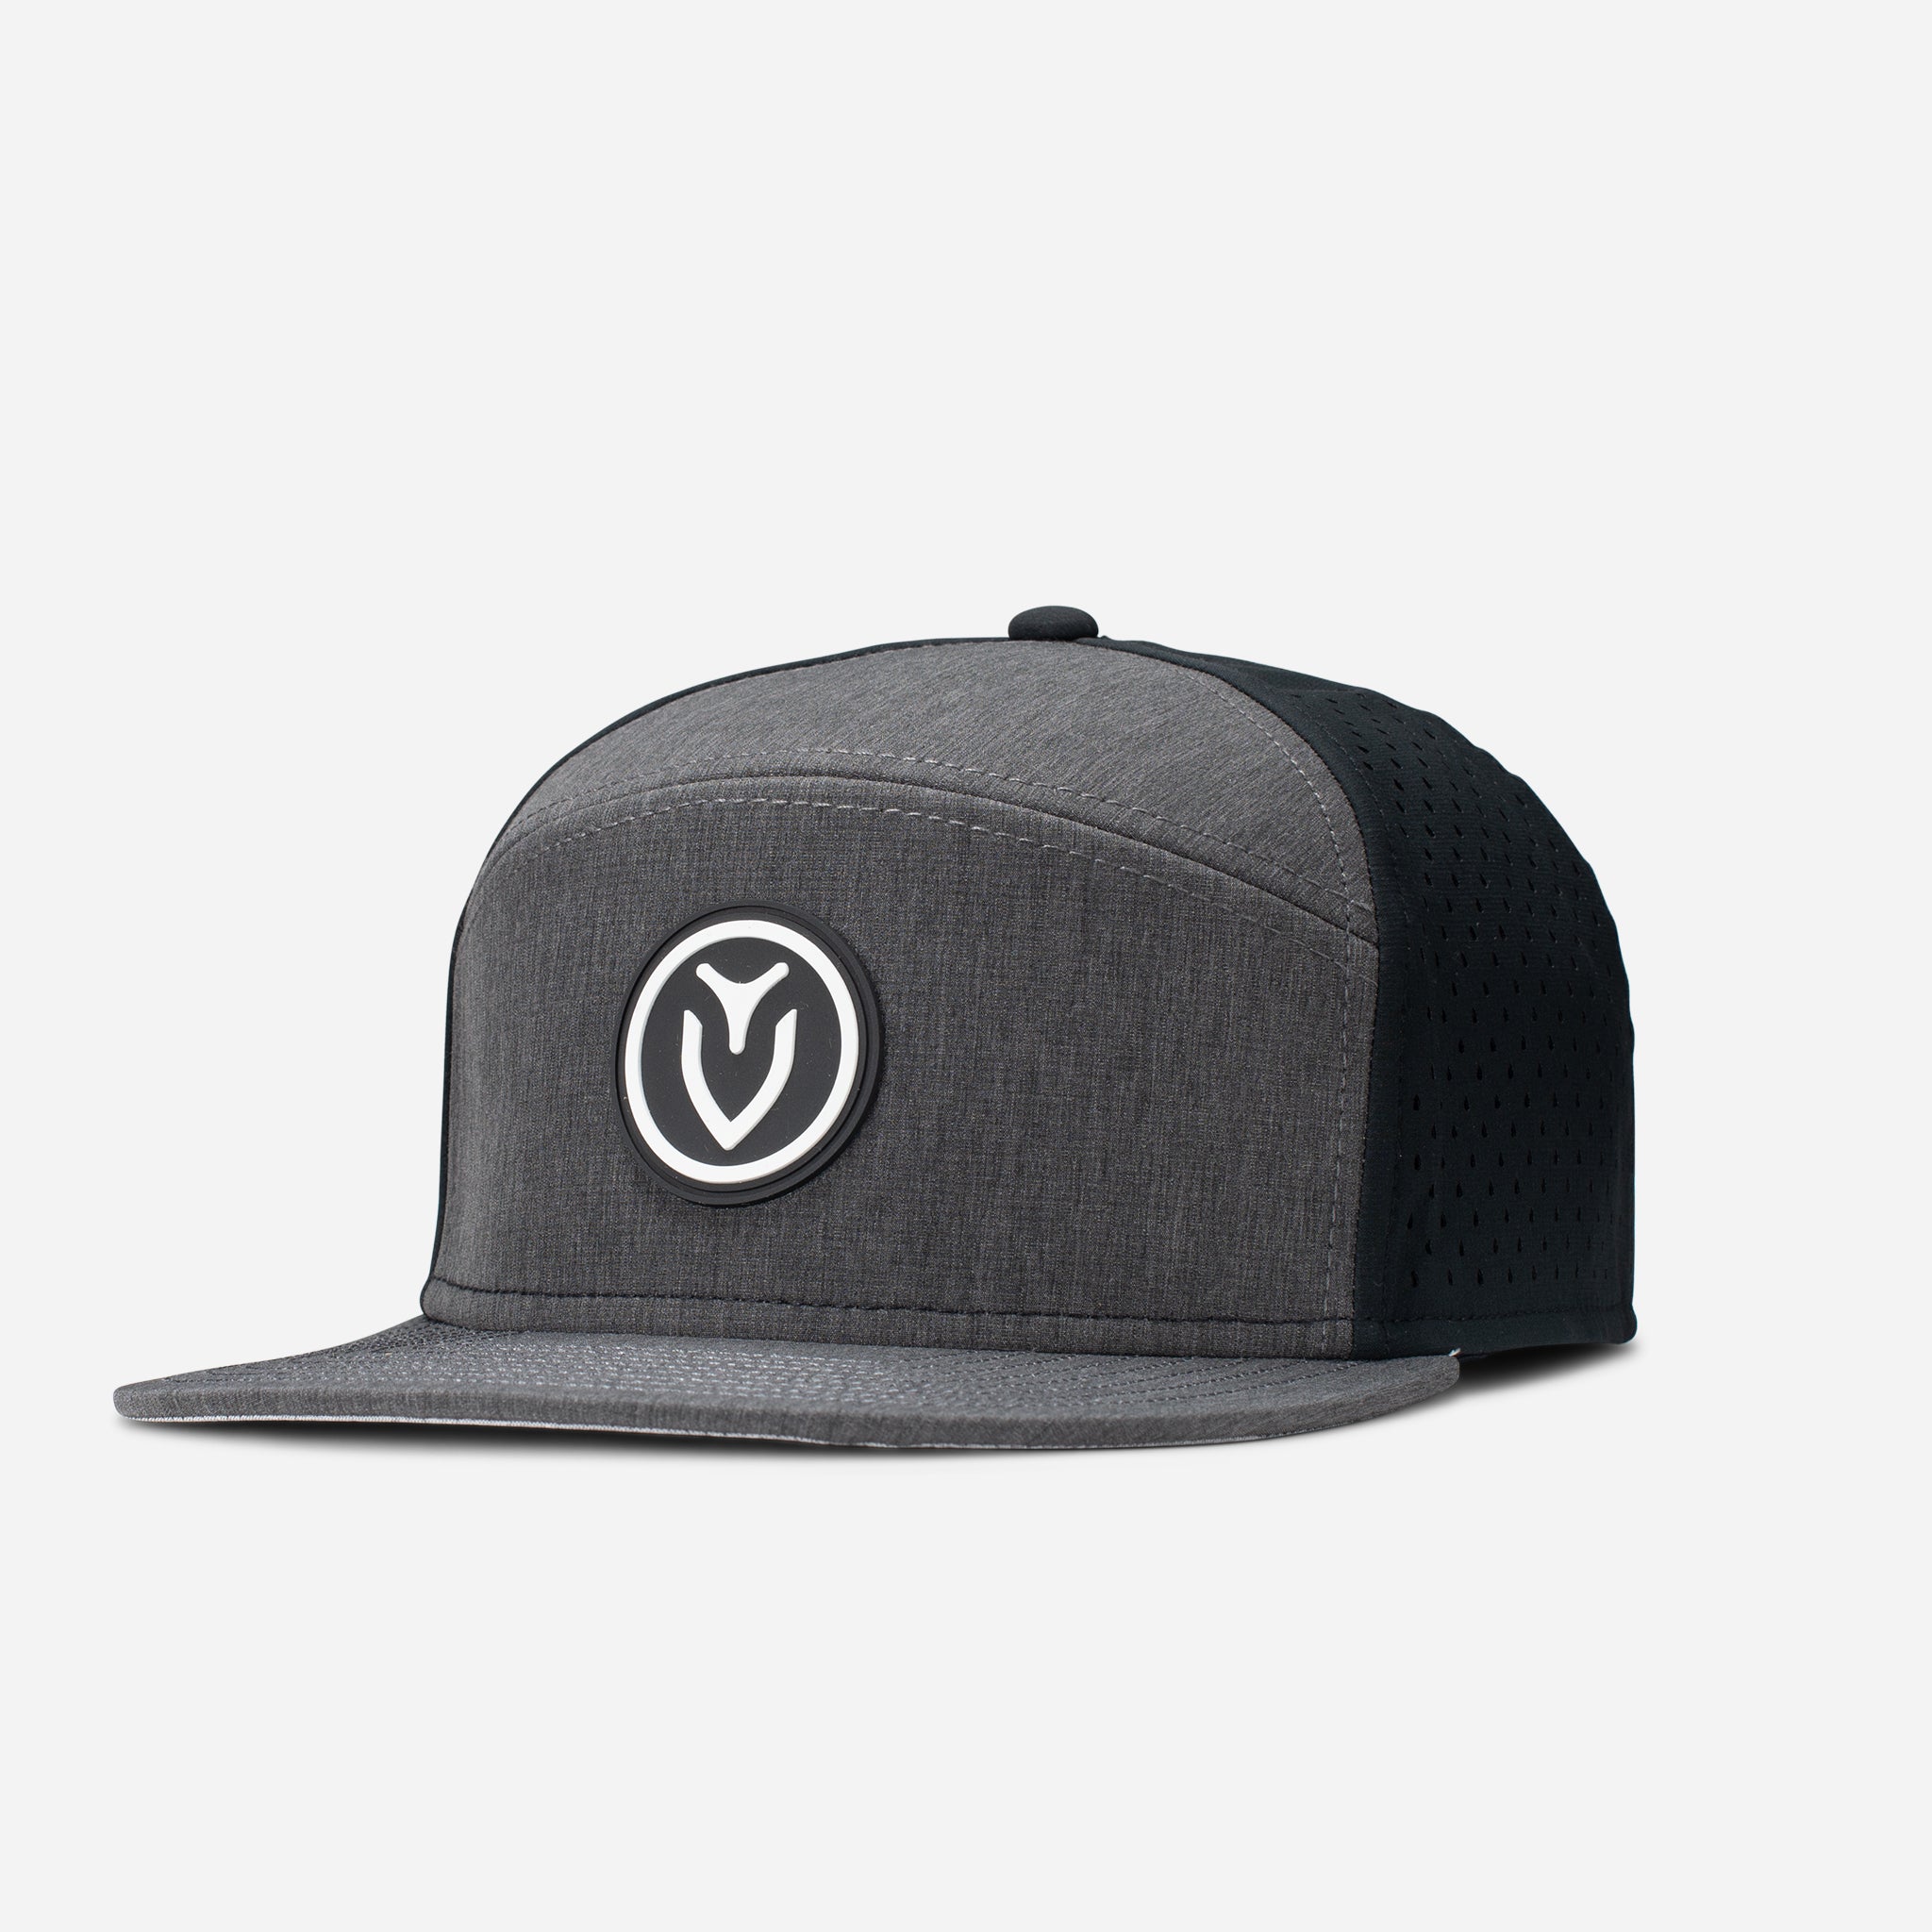 Vessel x Melin Trenches Hydro Hat Heather Charcoal / Classic